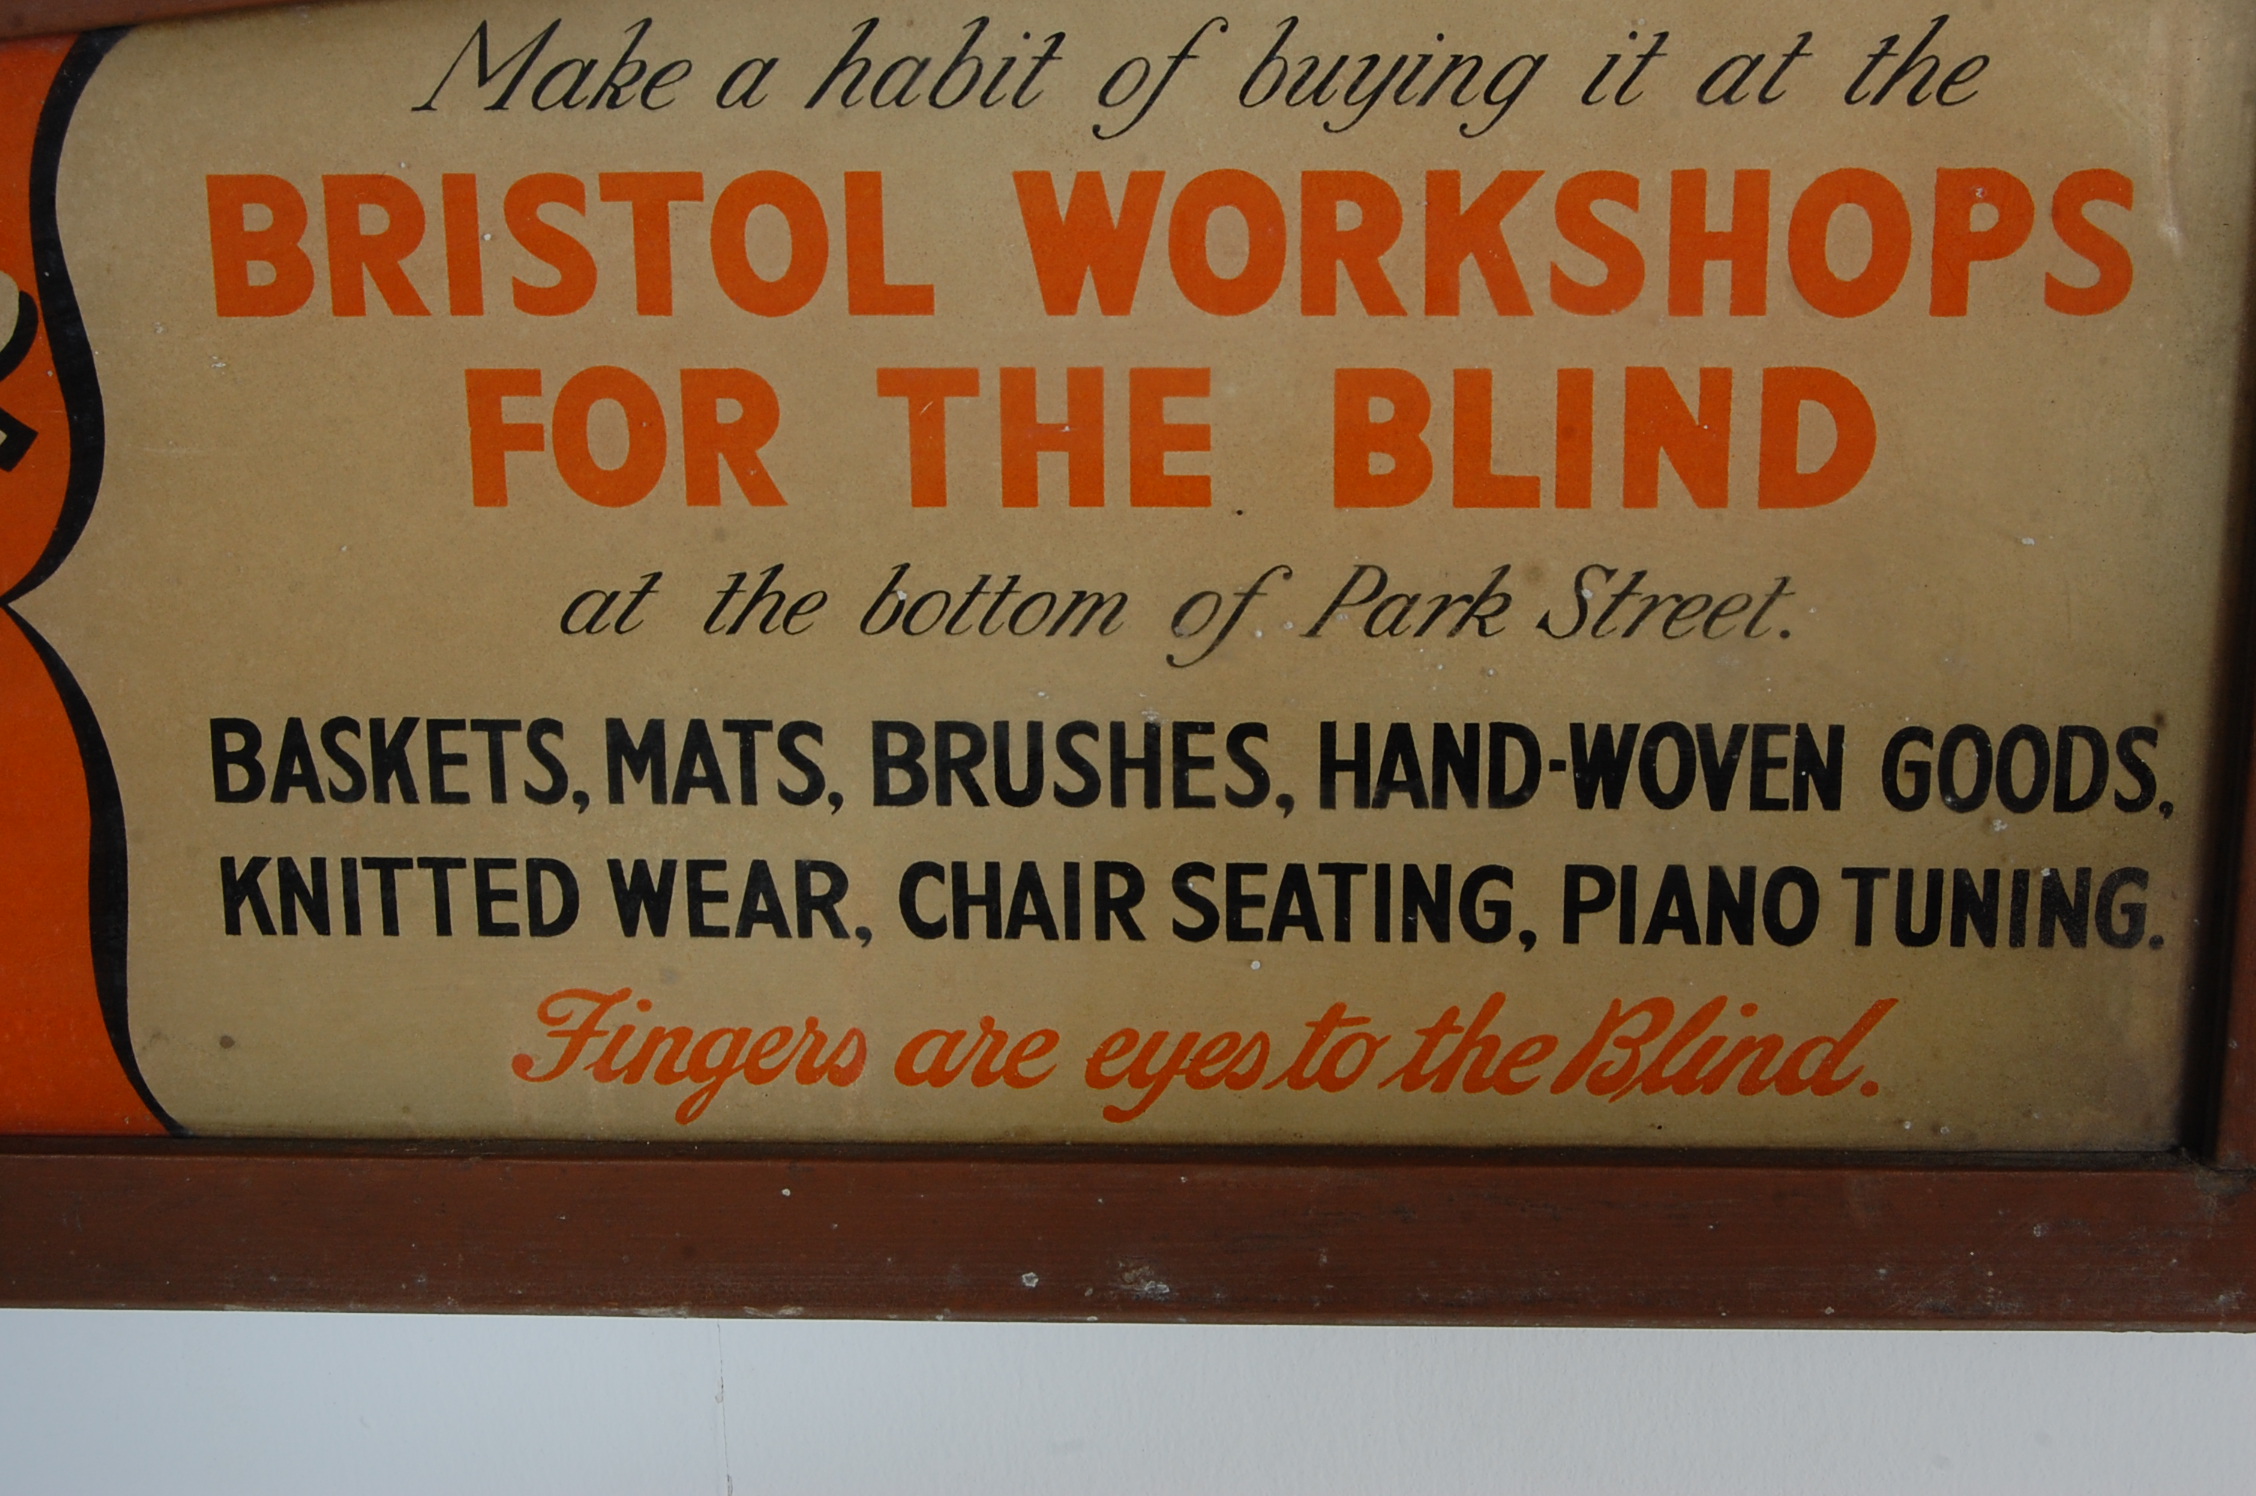 VINTAGE RETRO 20TH CENTURY GLASS ADVERTISING SIGN FOR BRISTOL WORKSHOP FOR THE BLIND - Image 6 of 7